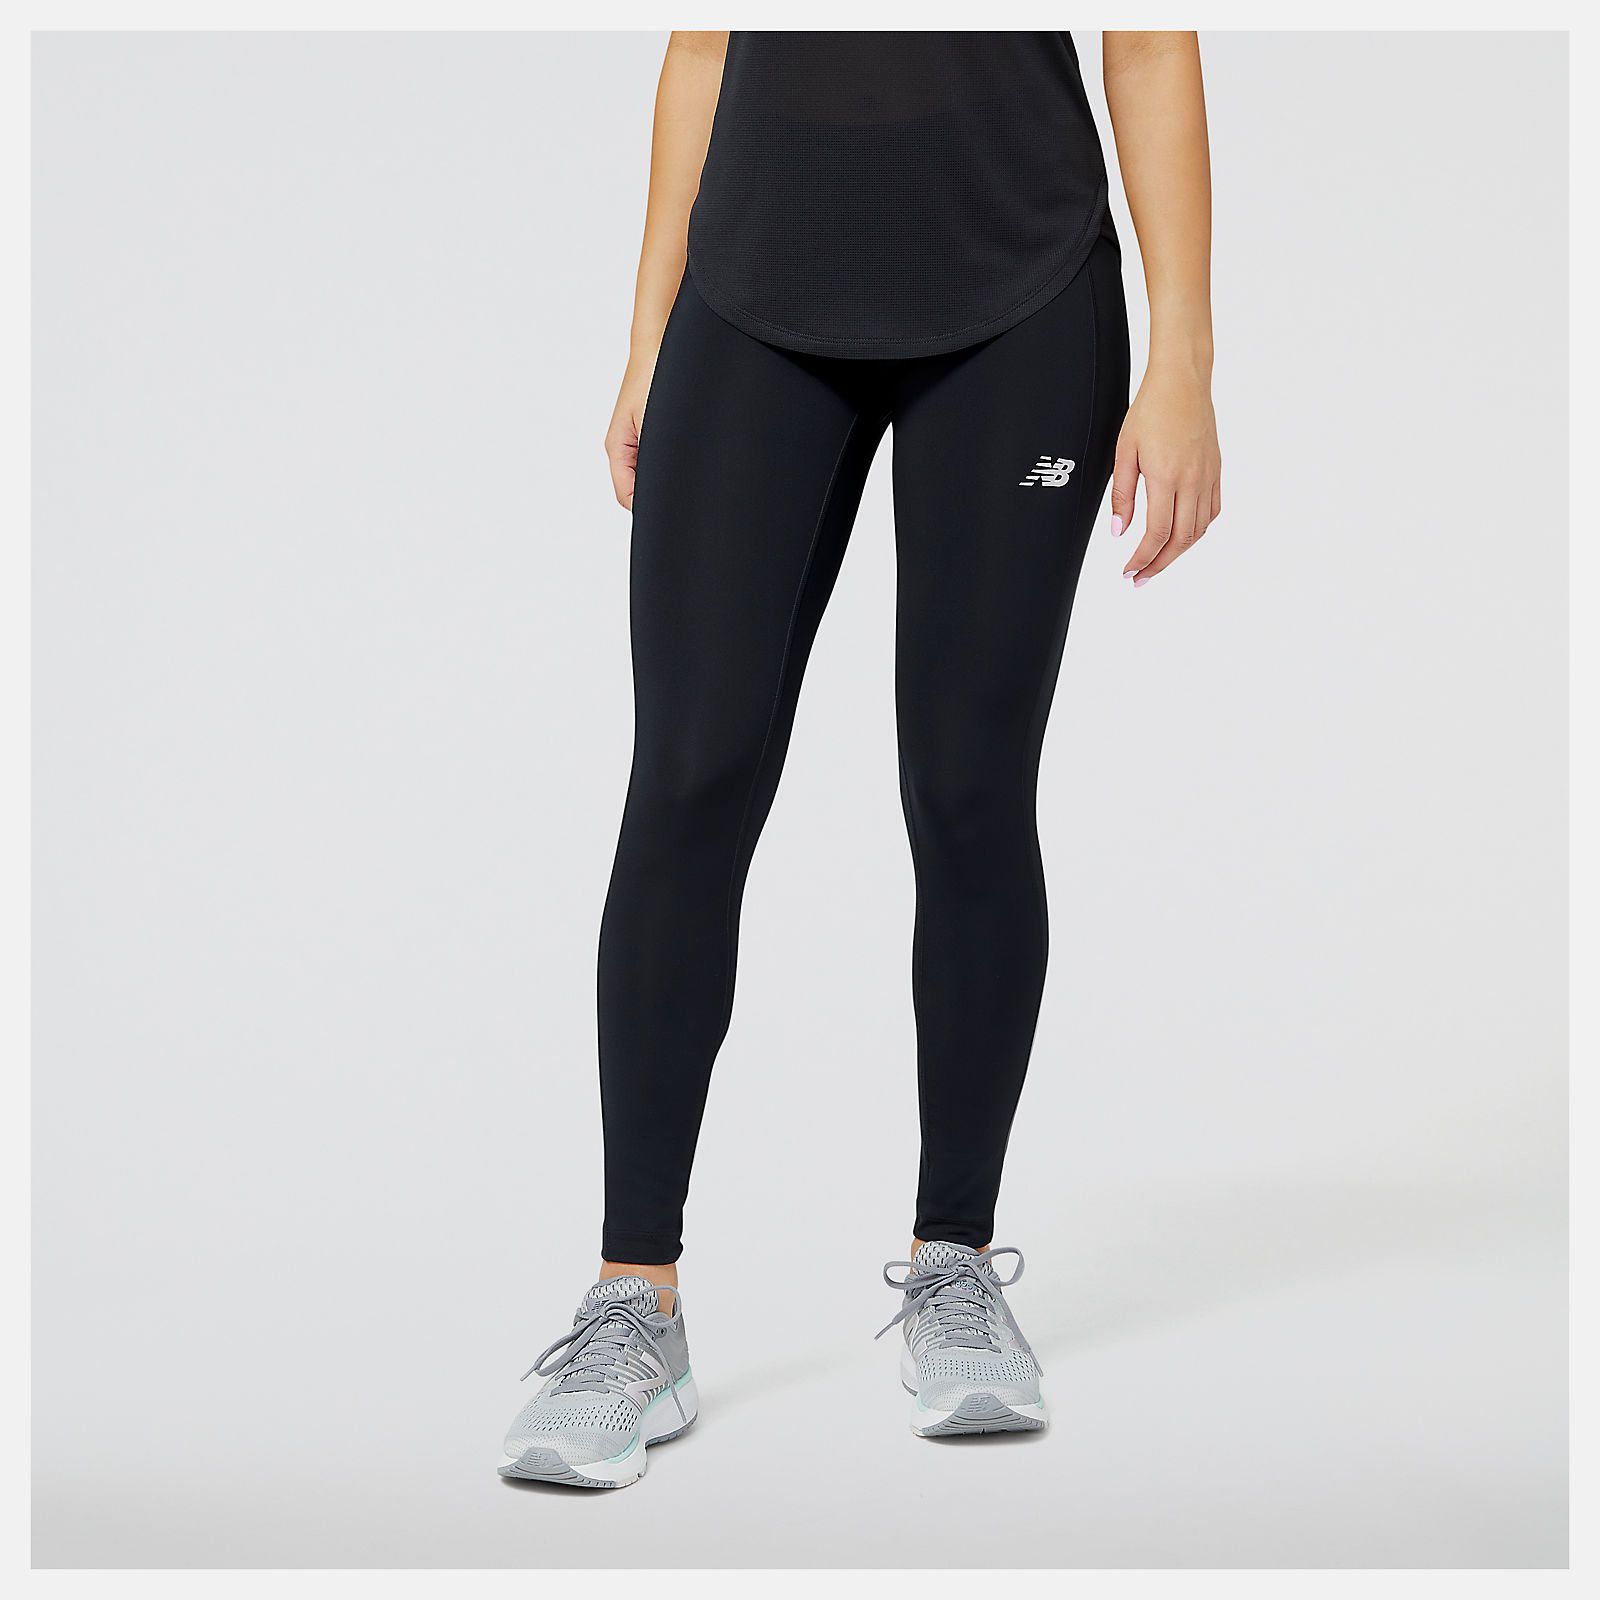 Accelerate Tight - New Balance